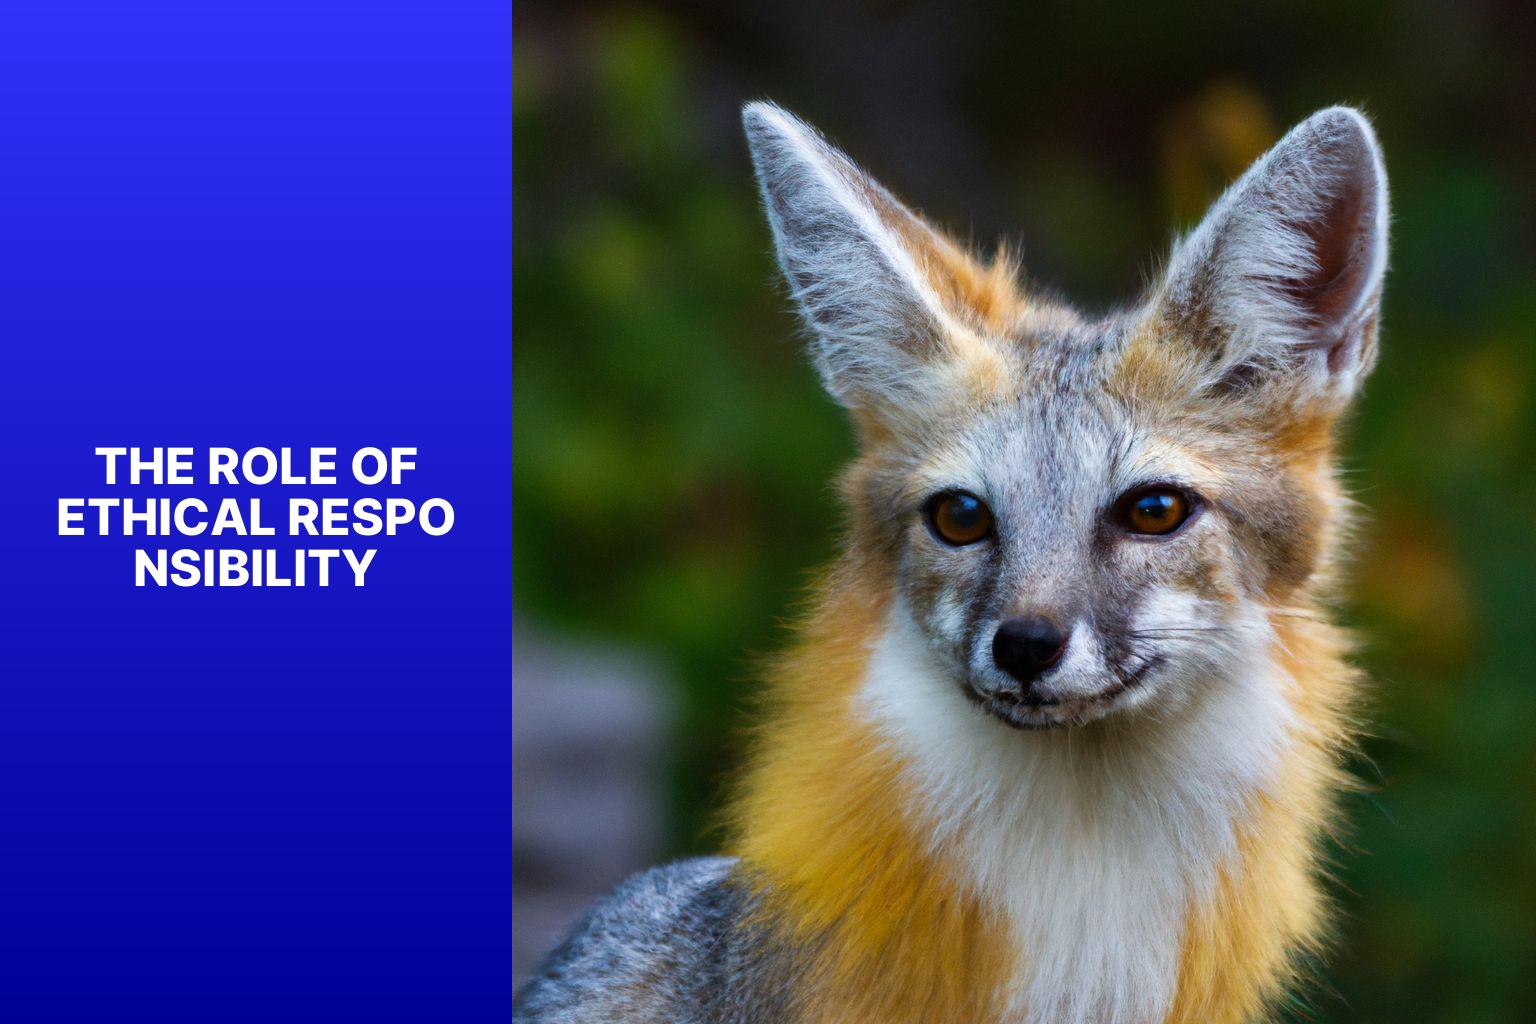 The Role of Ethical Responsibility - Kit Fox in Animal Welfare Ethics 